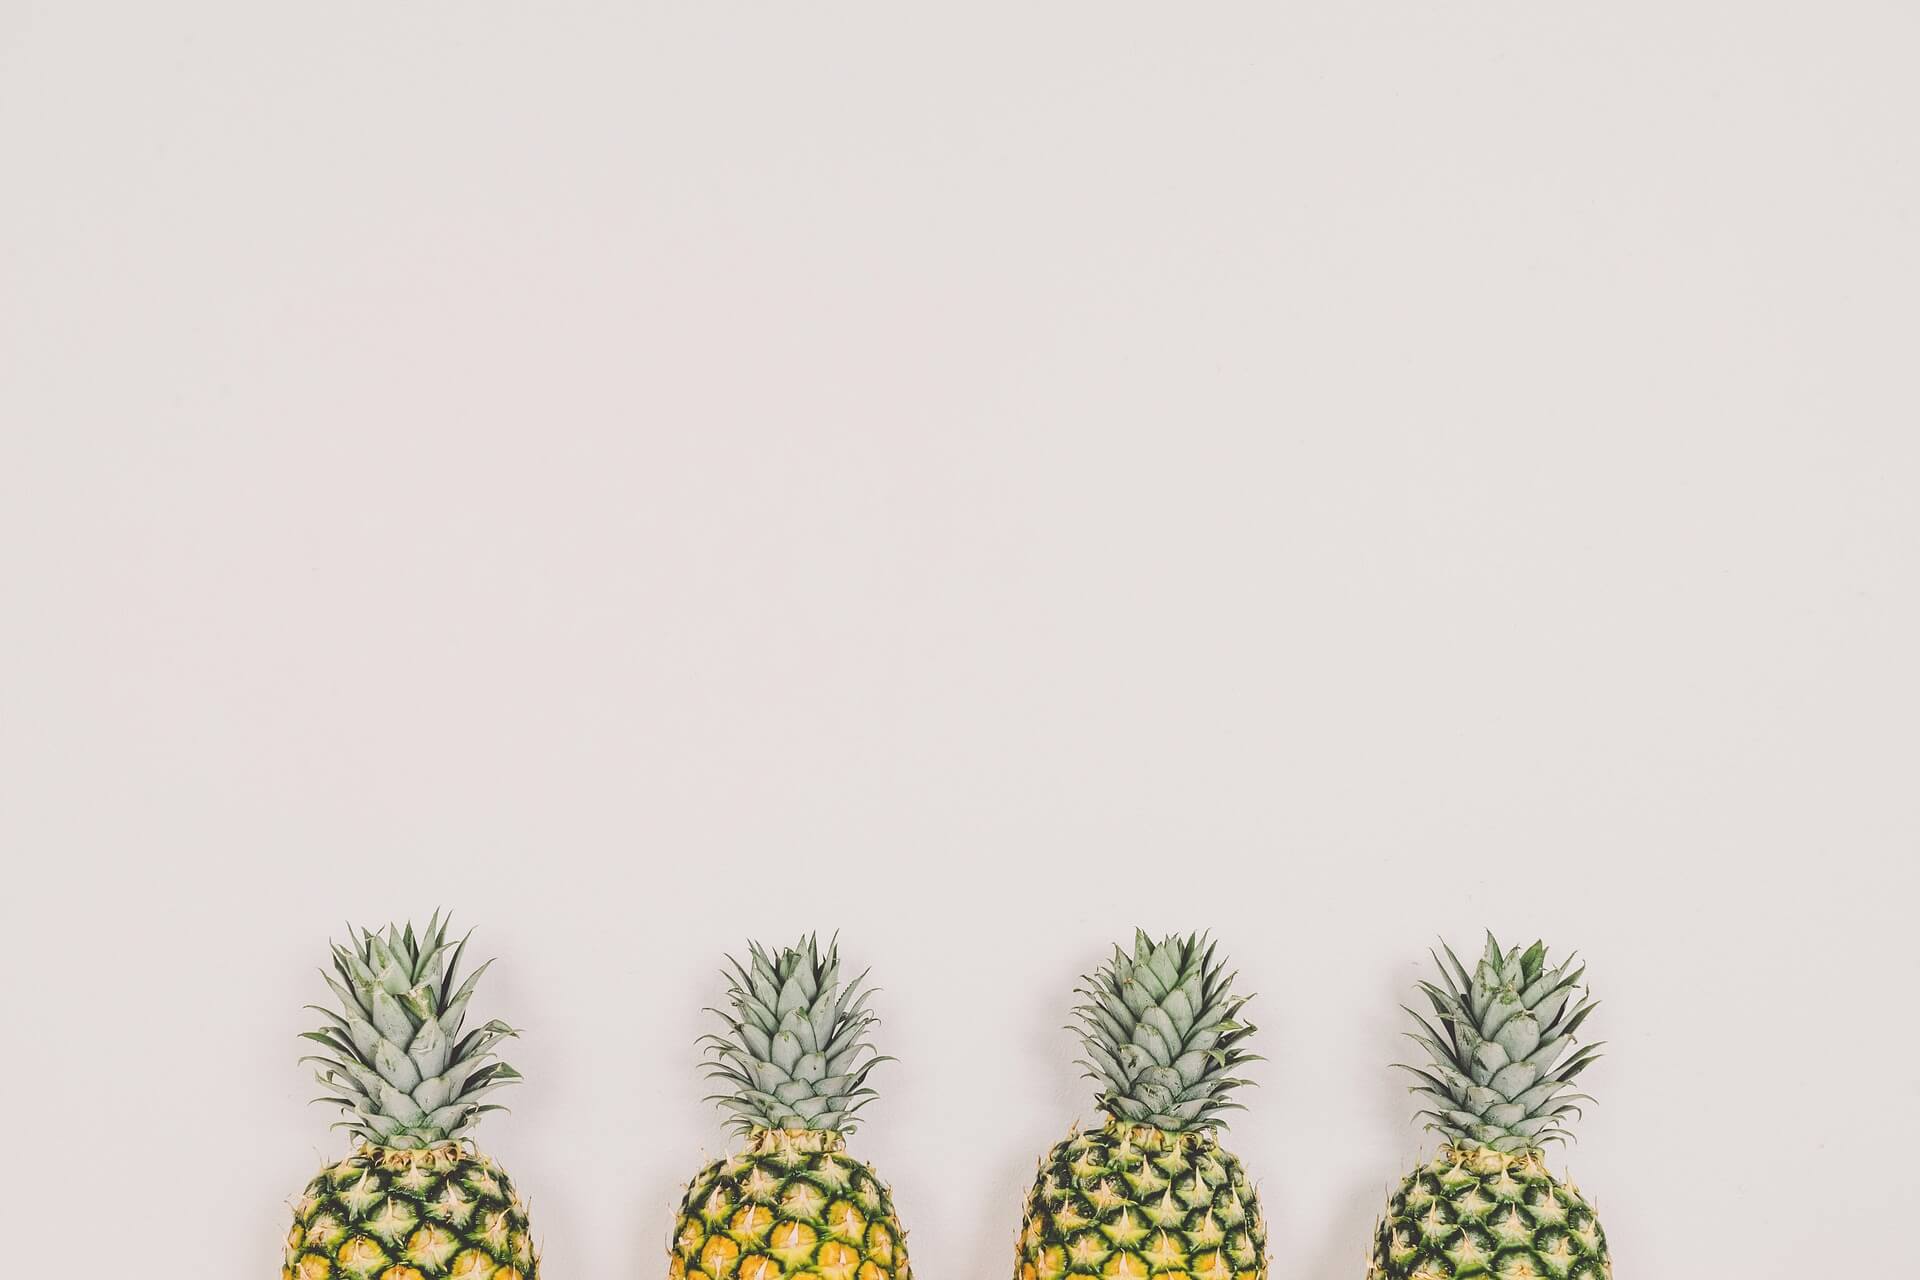 A row of pineapples against a white wall.